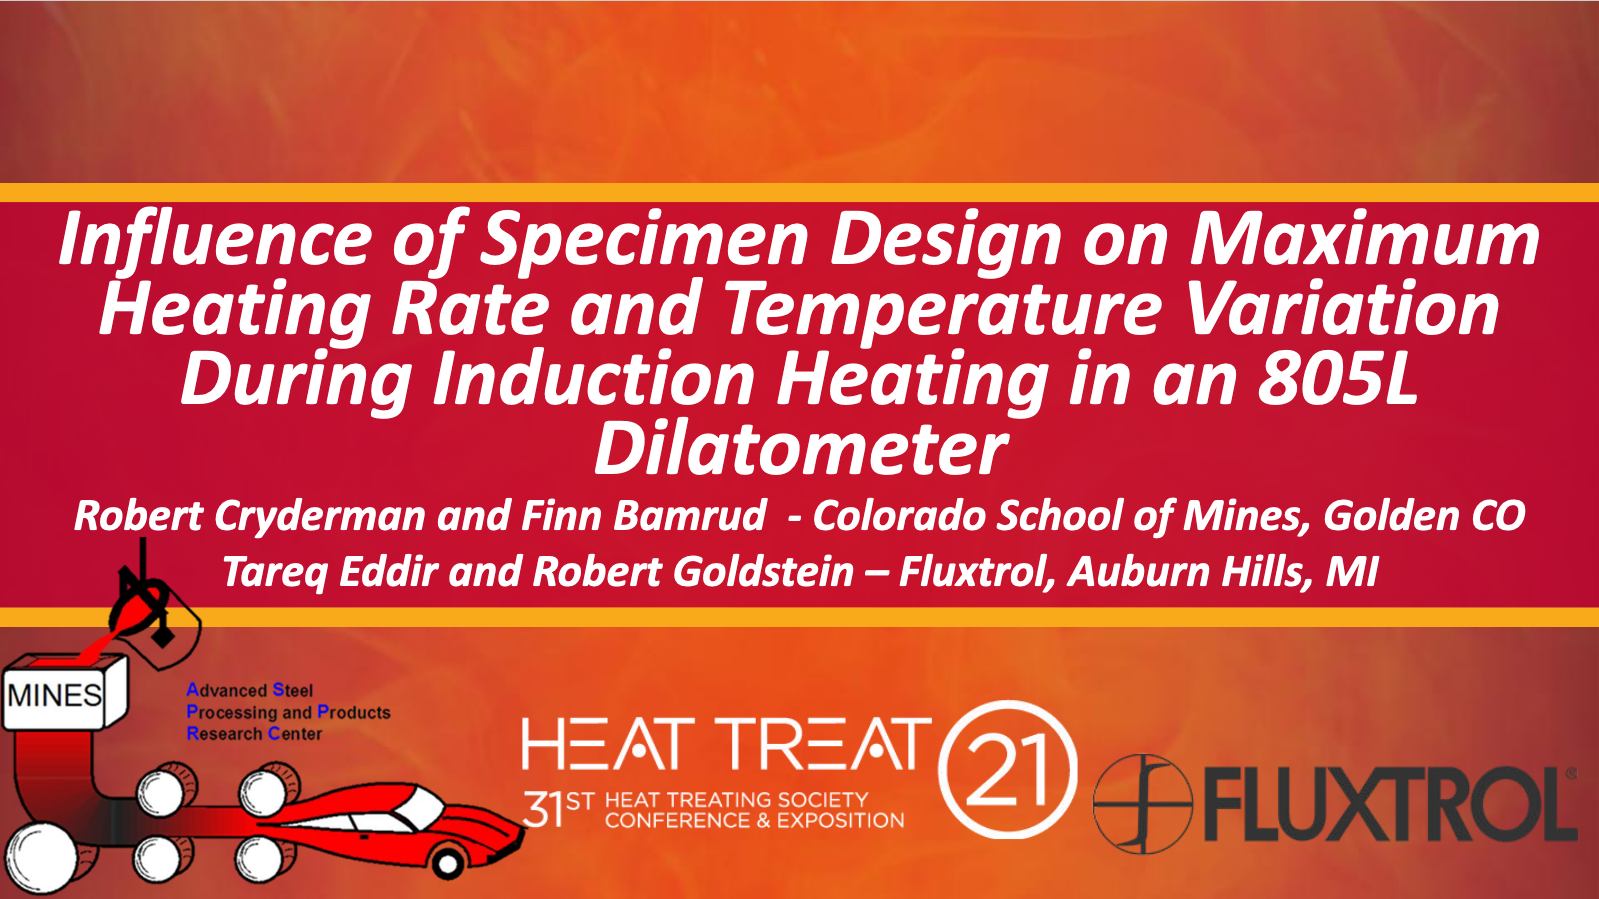 Fluxtrol ASM HTS 2021 Influence of Specimen Design on Maximum Heating Rate and Temperature Variation During Induction Heating in an 805L Dilatometer Presentation